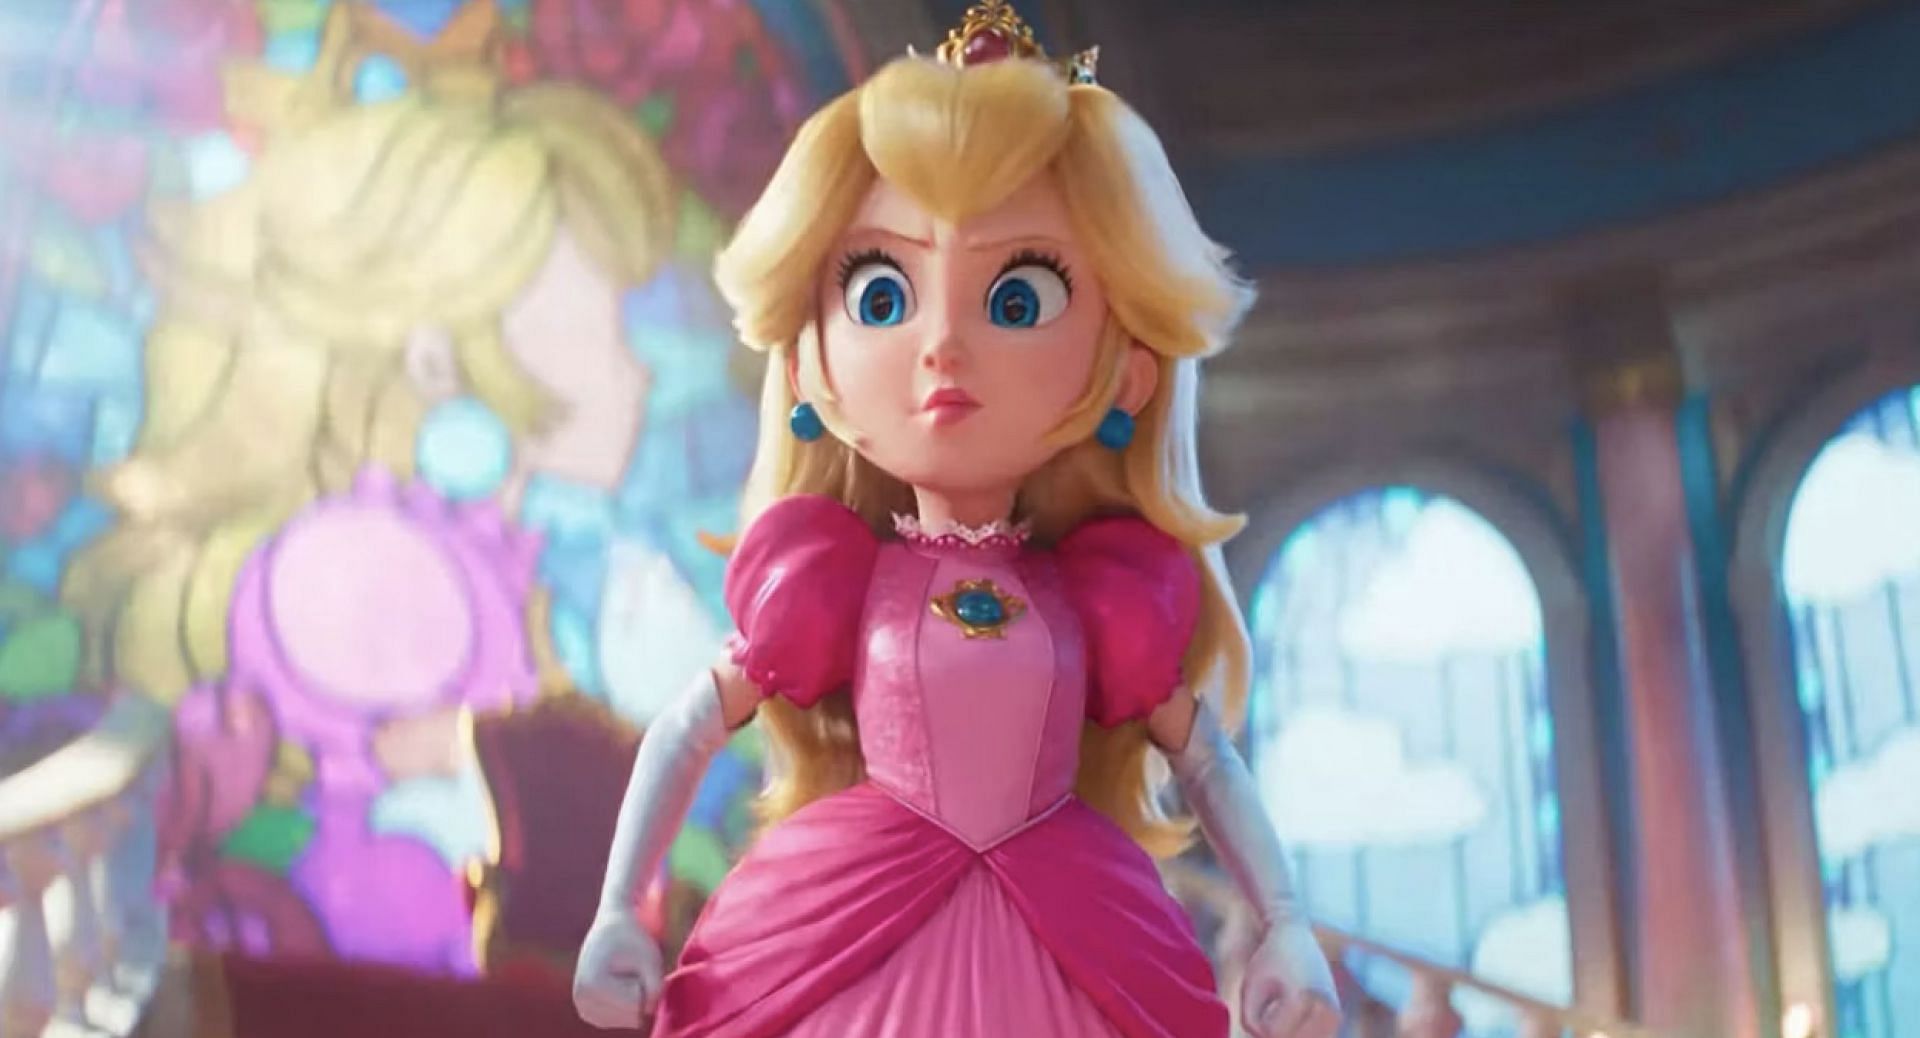 Fans divided over new version of Princess Peach in Super Mario Bros movie (Image via Universal Pictures)